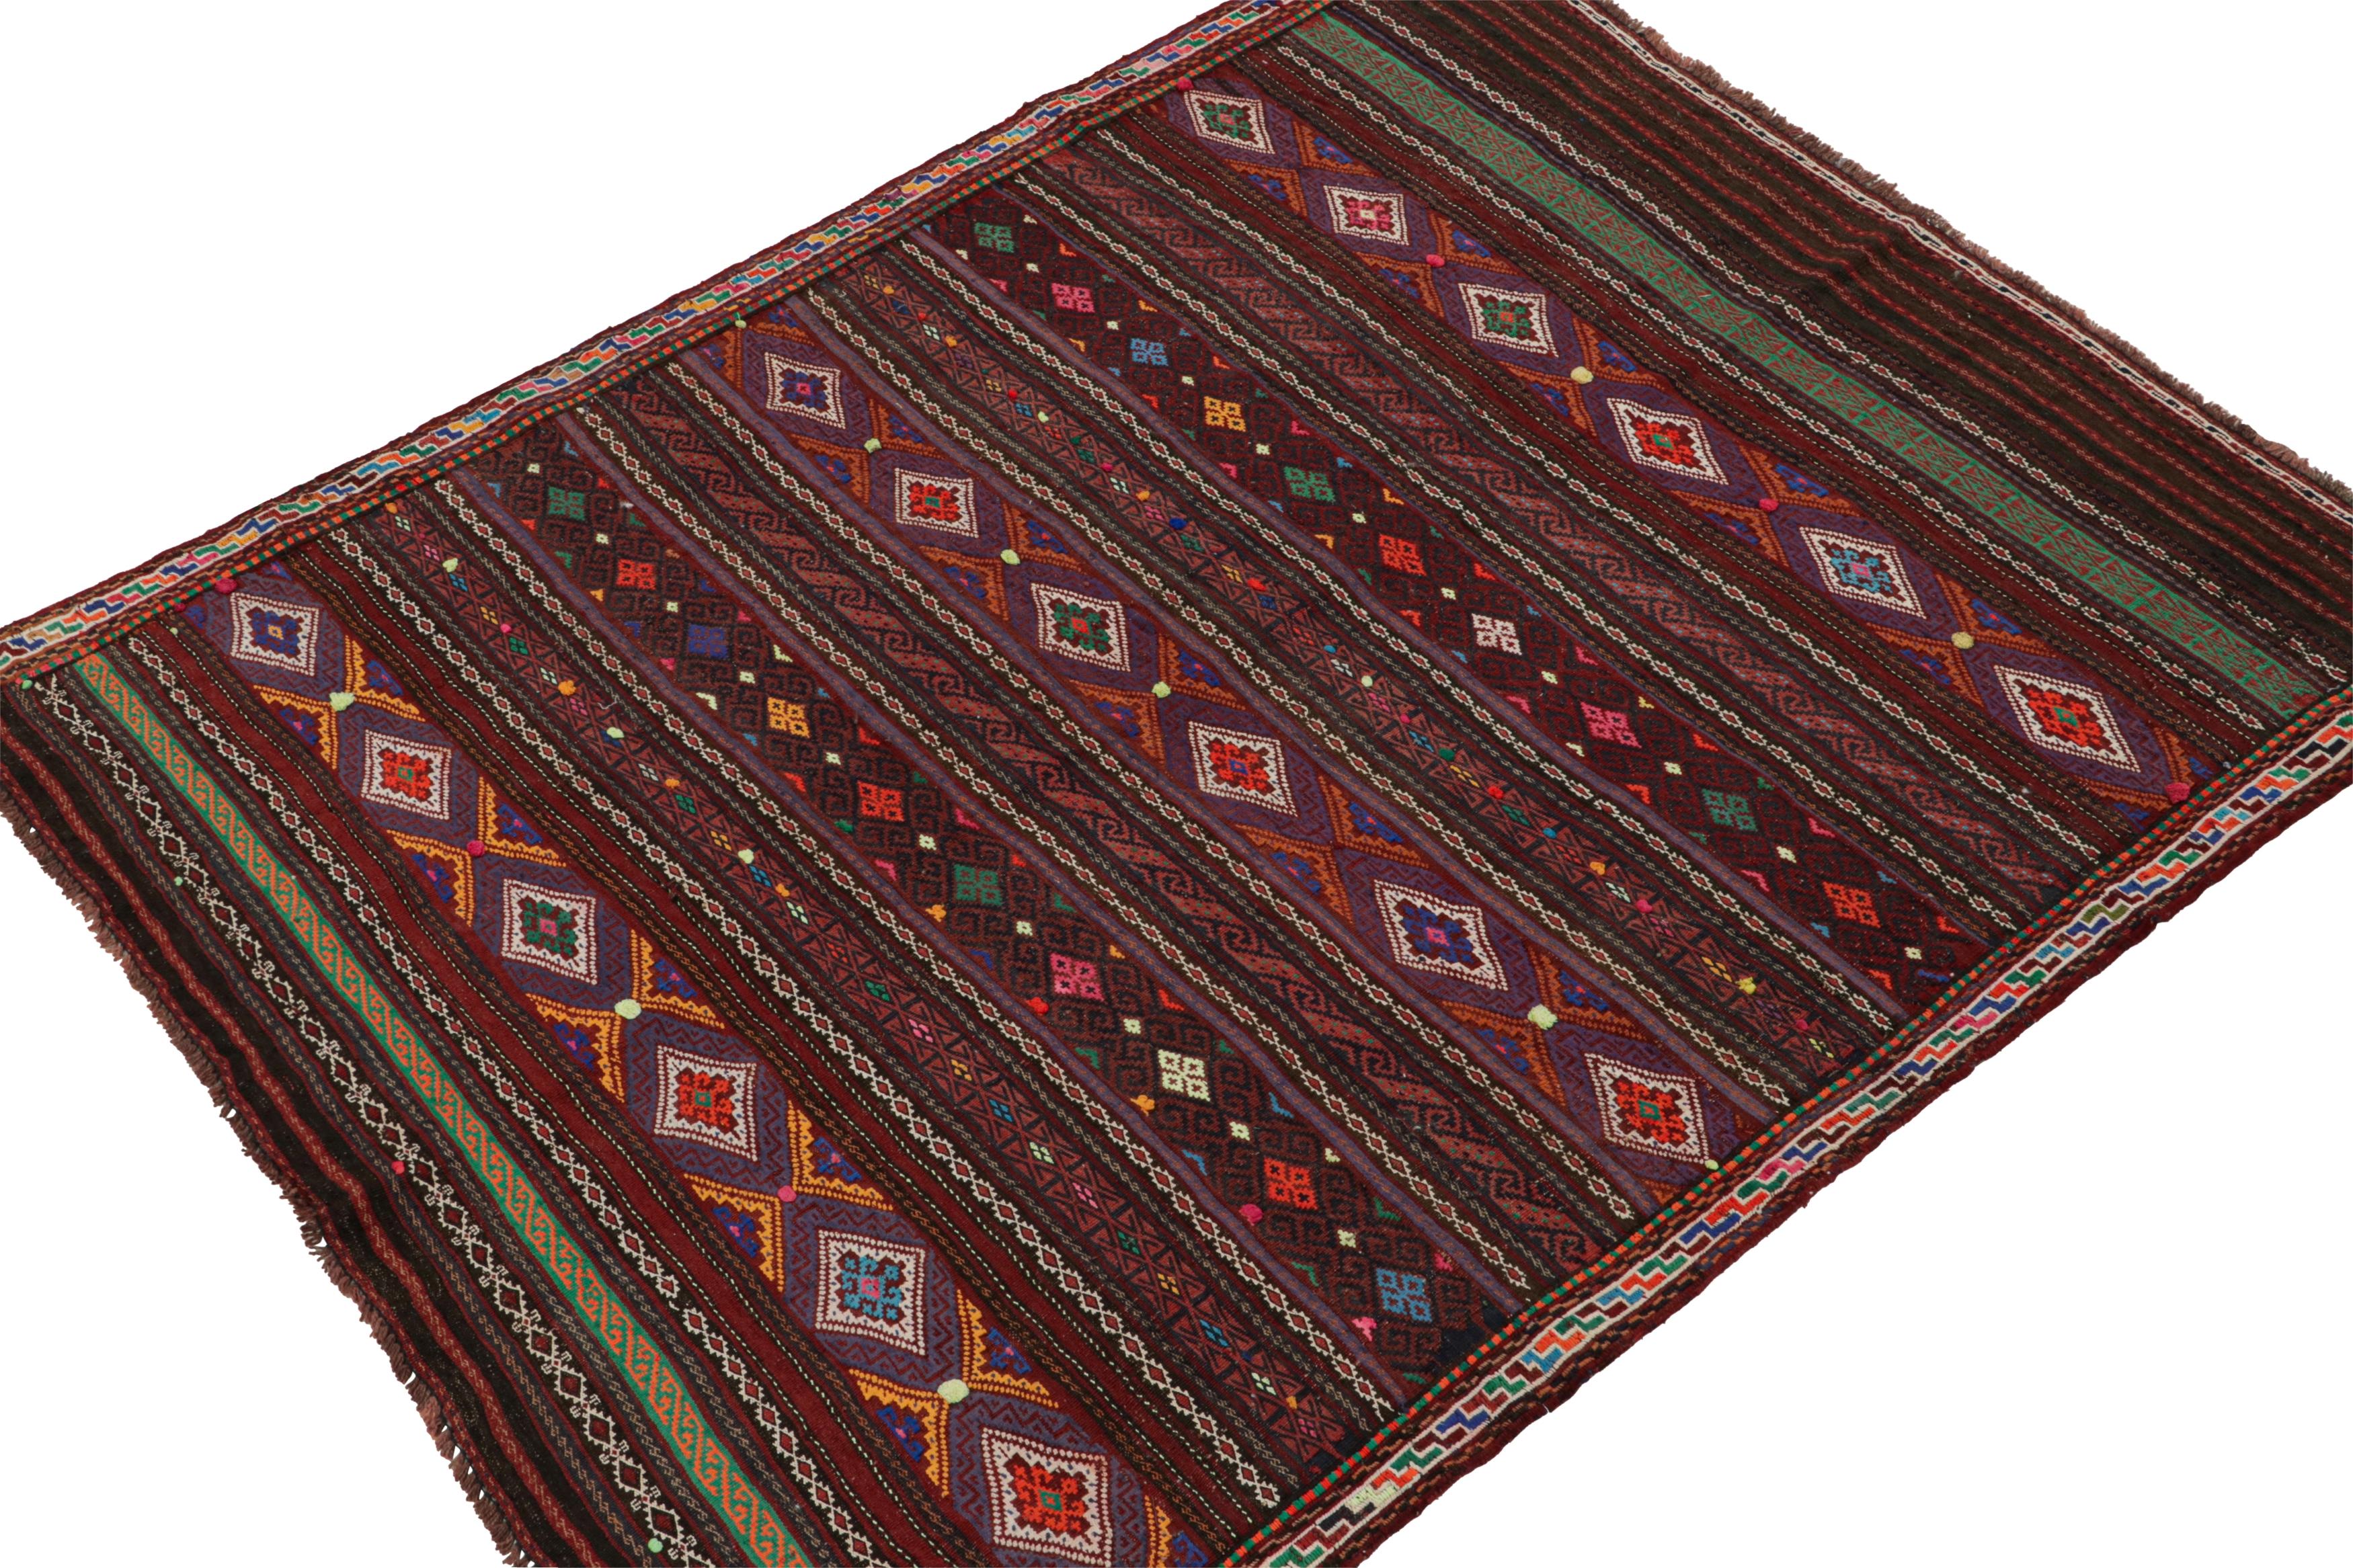 Hand-knotted in wool, this 5x6 Baluch Persian rug of the 1950s is the latest to enter Rug & Kilim’s Antique & Vintage collection.

On the Design:

The piece carries tribal patterns in horizontal stripes alternating in polychromatic tones. Carrying